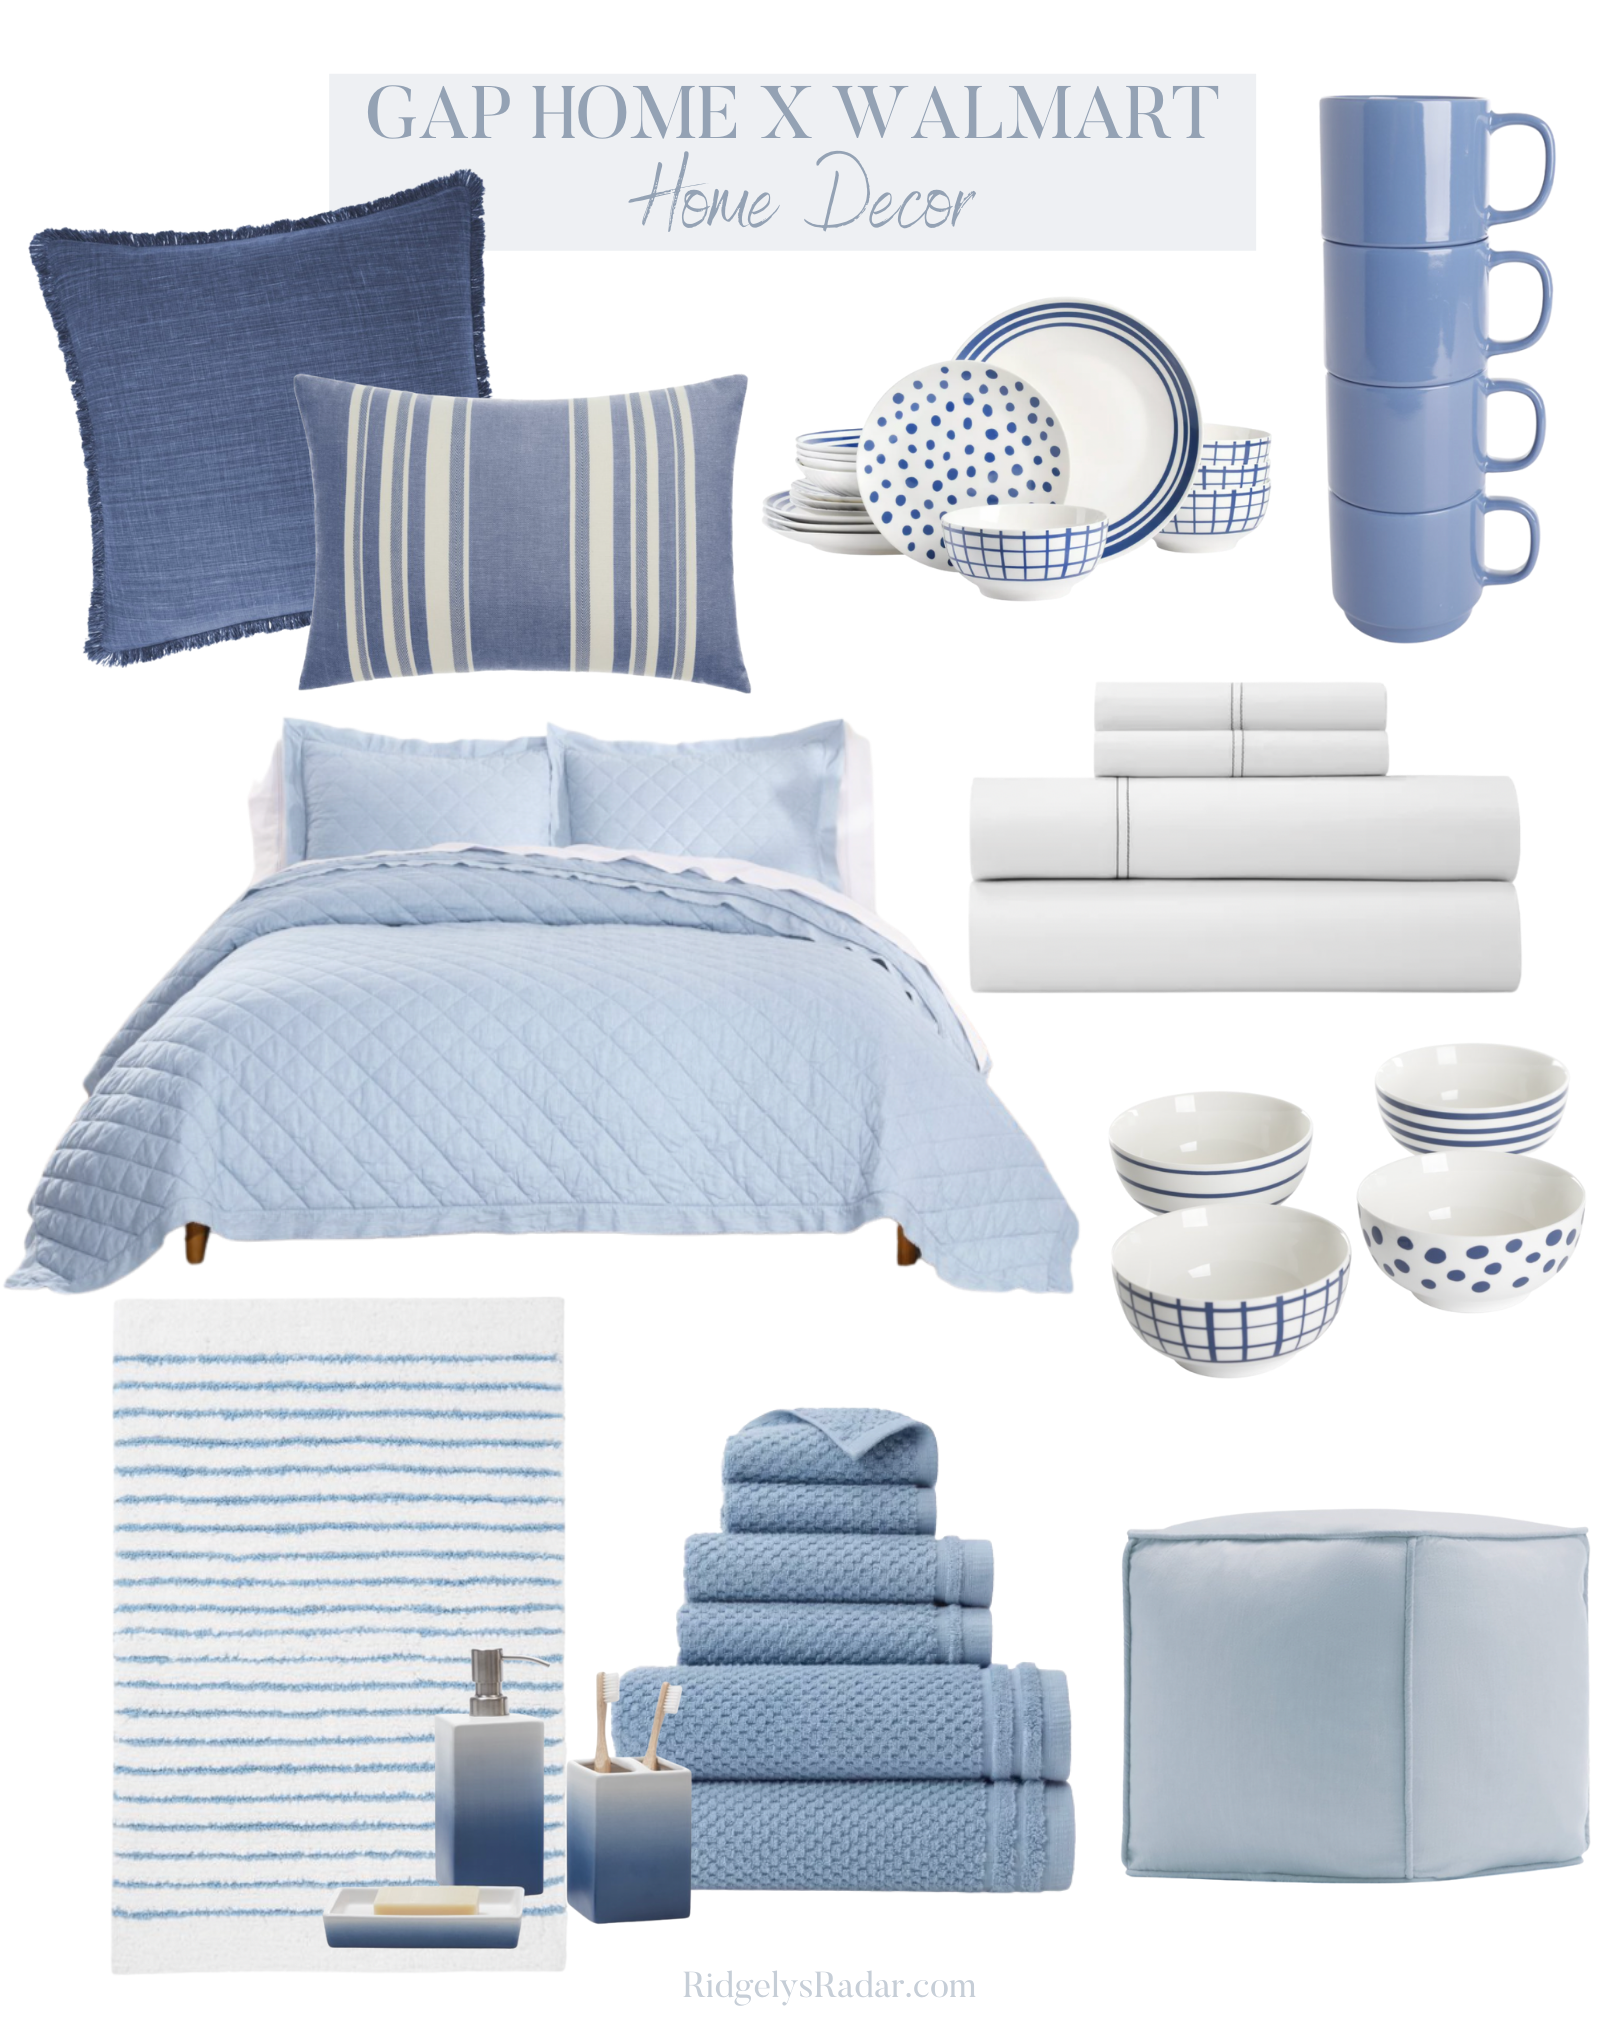 Blue and White Bedding, Bath and Dining from Gap Home at Walmart